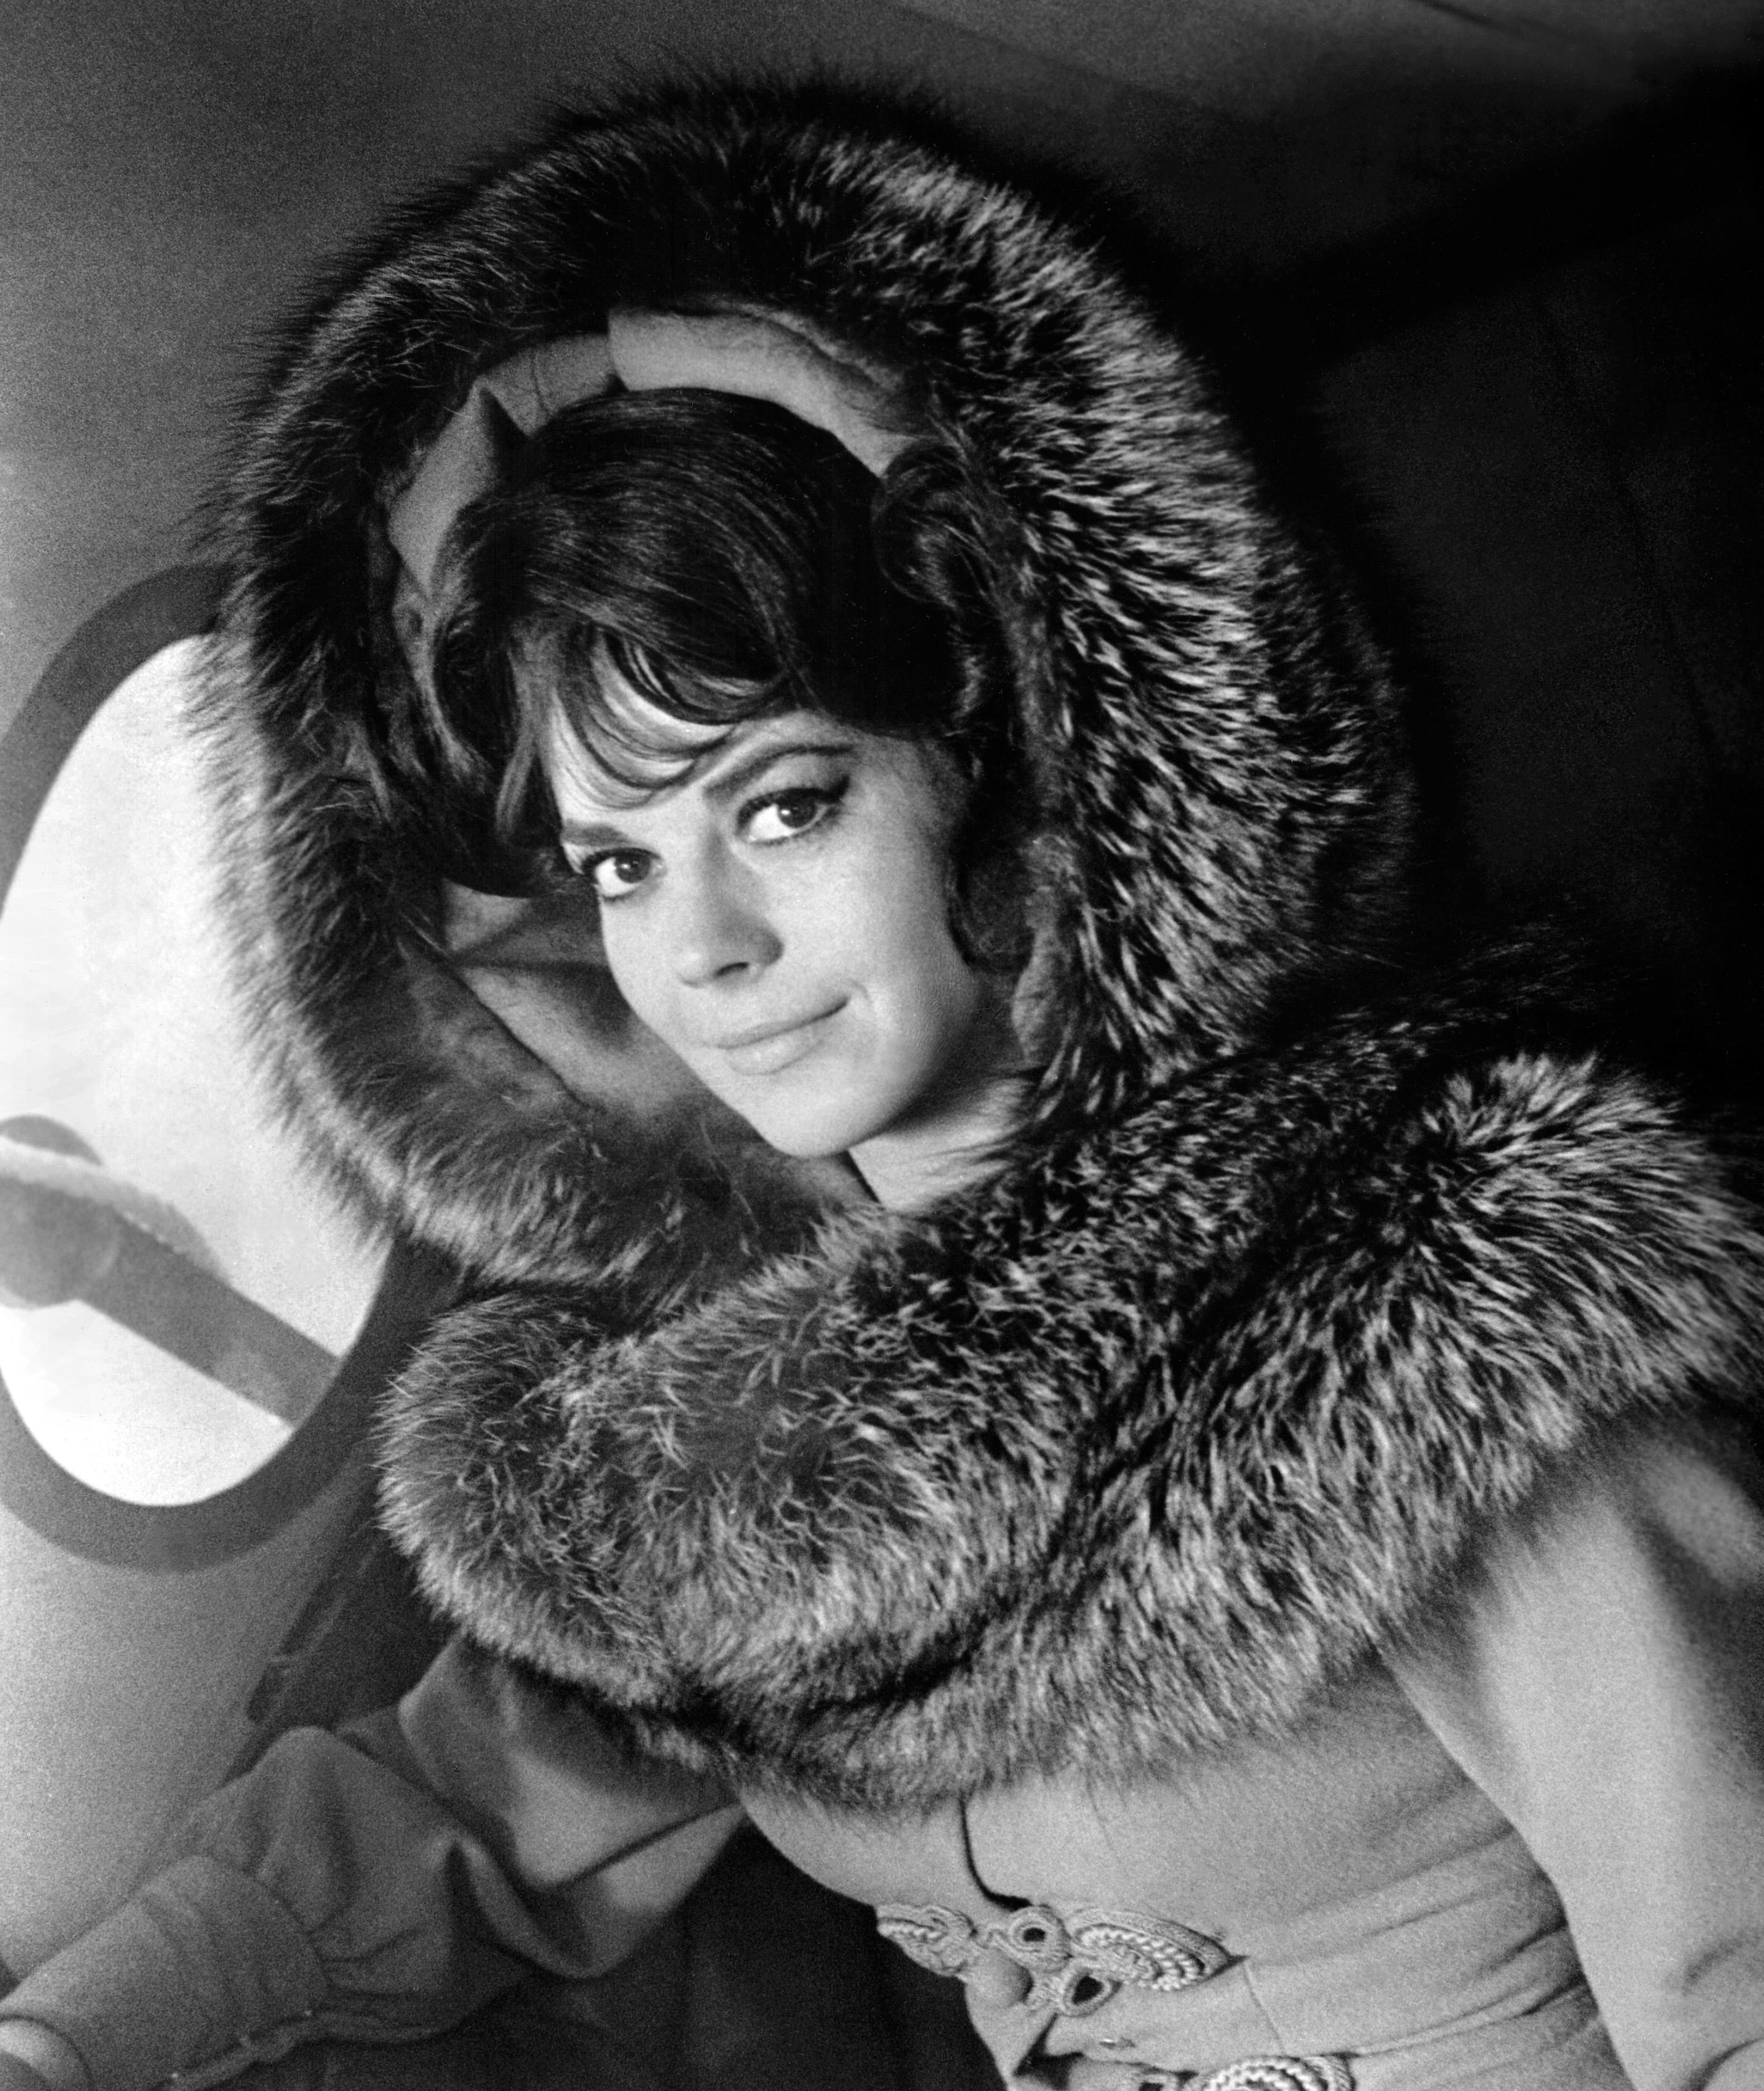 Unknown Black and White Photograph - Natalie Wood in Coat for "The Great Race" Globe Photos Fine Art Print